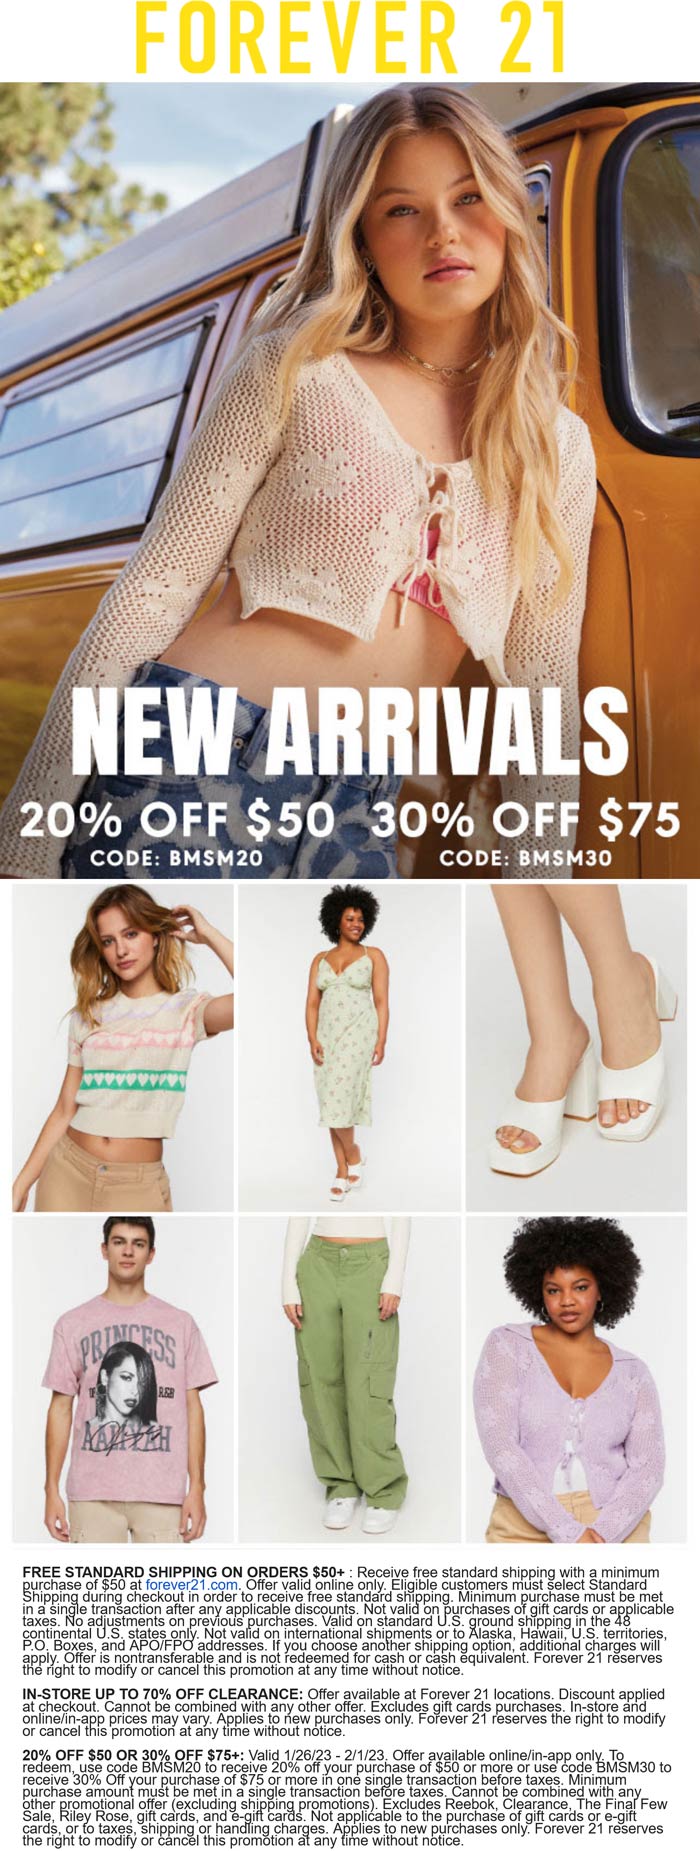 Forever 21 stores Coupon  20-30% off $50+ online at Forever 21 via promo code BMSM30 #forever21 